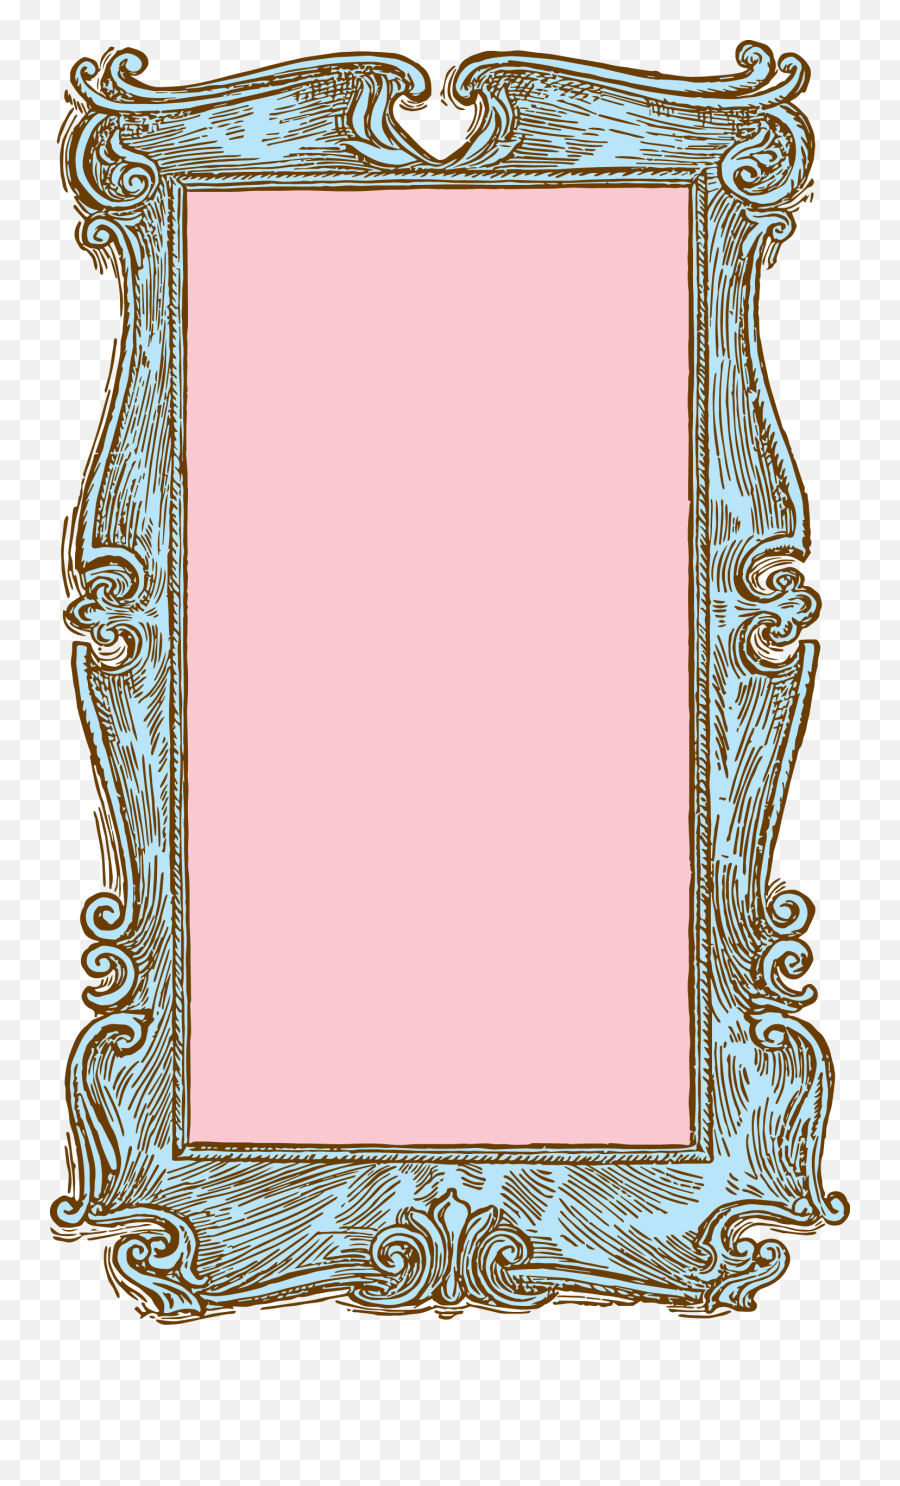 Free Stock Image Vintage Wooden Frame Vector Clipart Oh So - Clip Art Victorian Picture Frame Emoji,Wood Grain Clipart